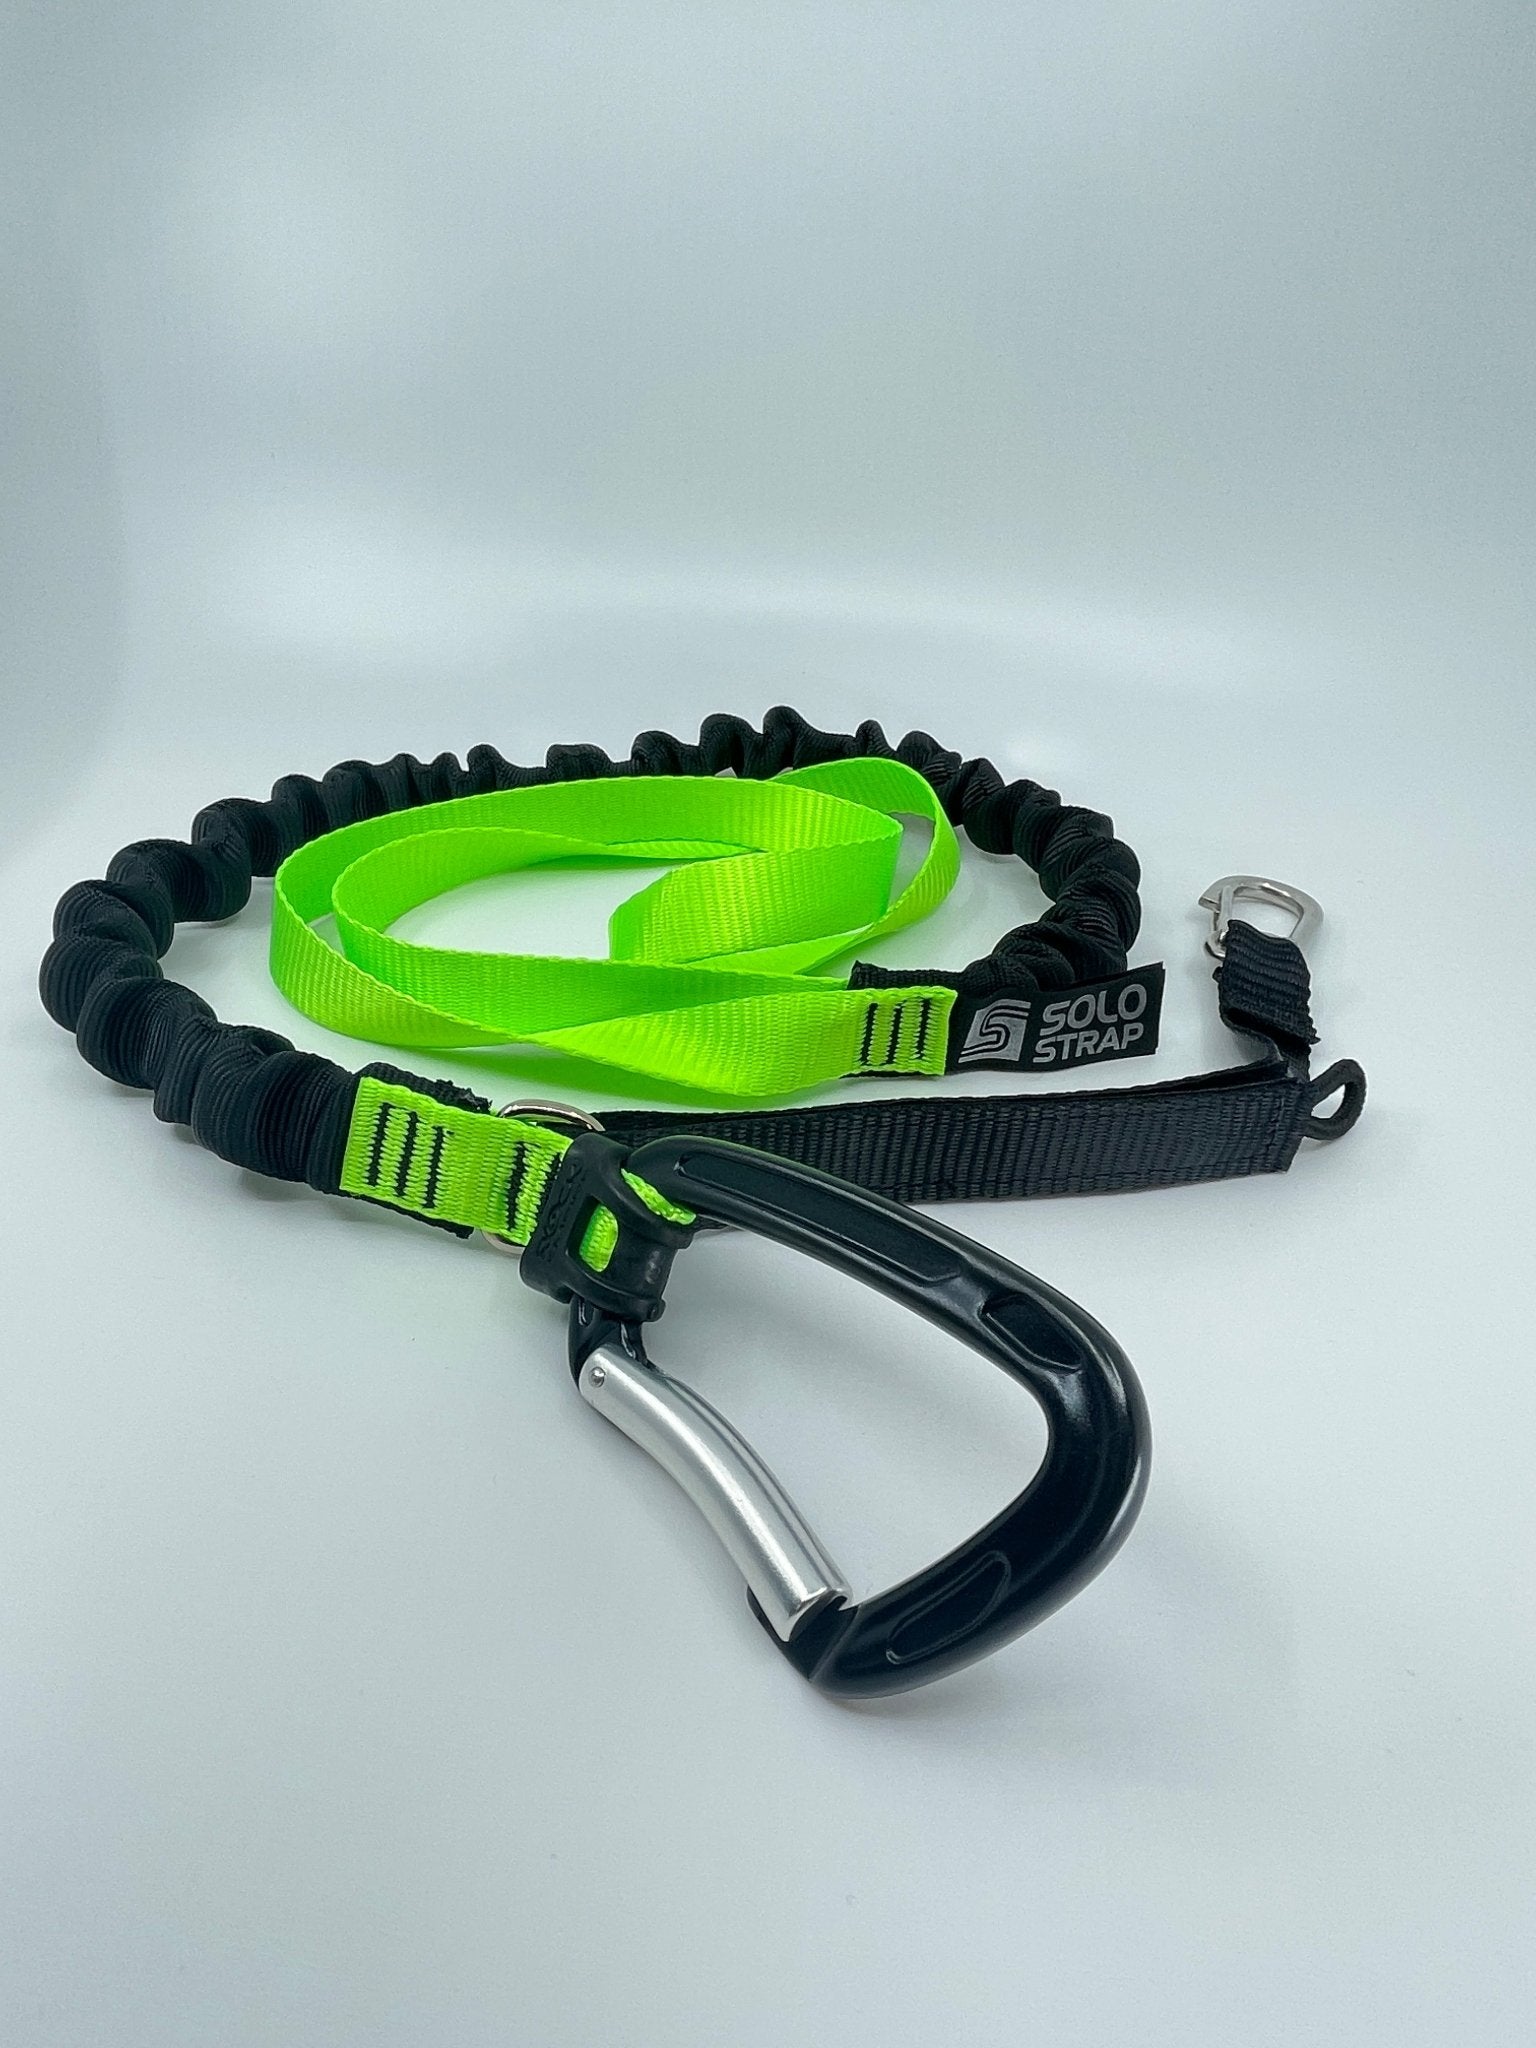 ‘Only One’ DUAL CONNECTION SELF-LAUNCH KITE LEASH - Worthing Watersports - - Solo-Strap